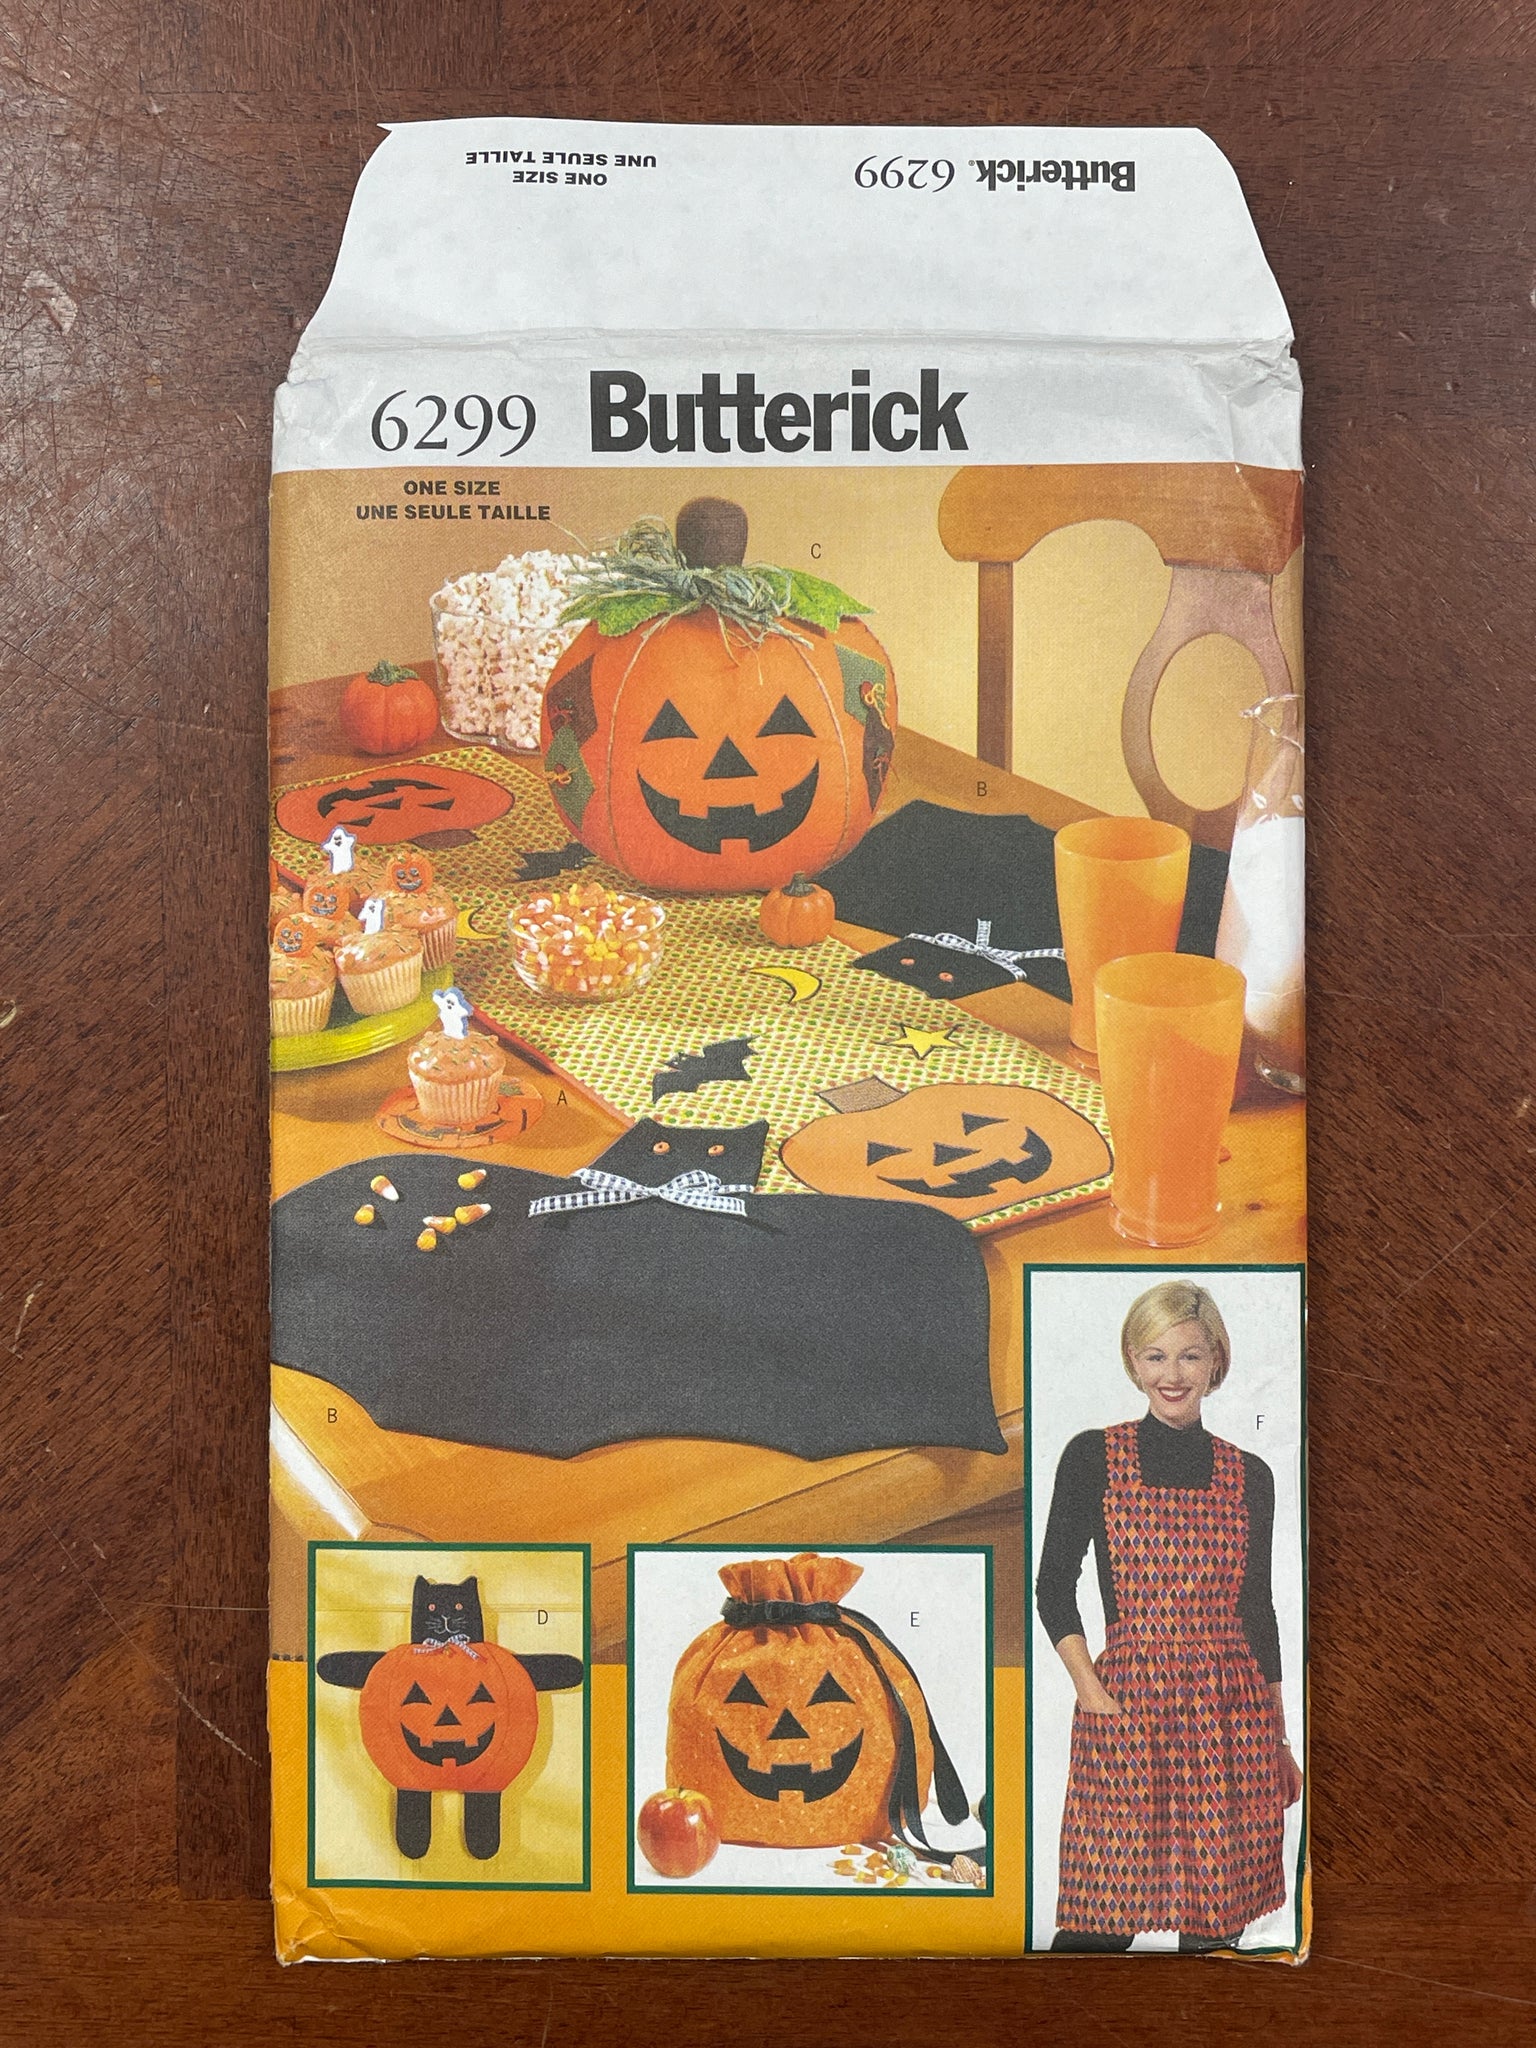 1999 Butterick 6299 Pattern - Halloween Decorations and Apron FACTORY FOLDED